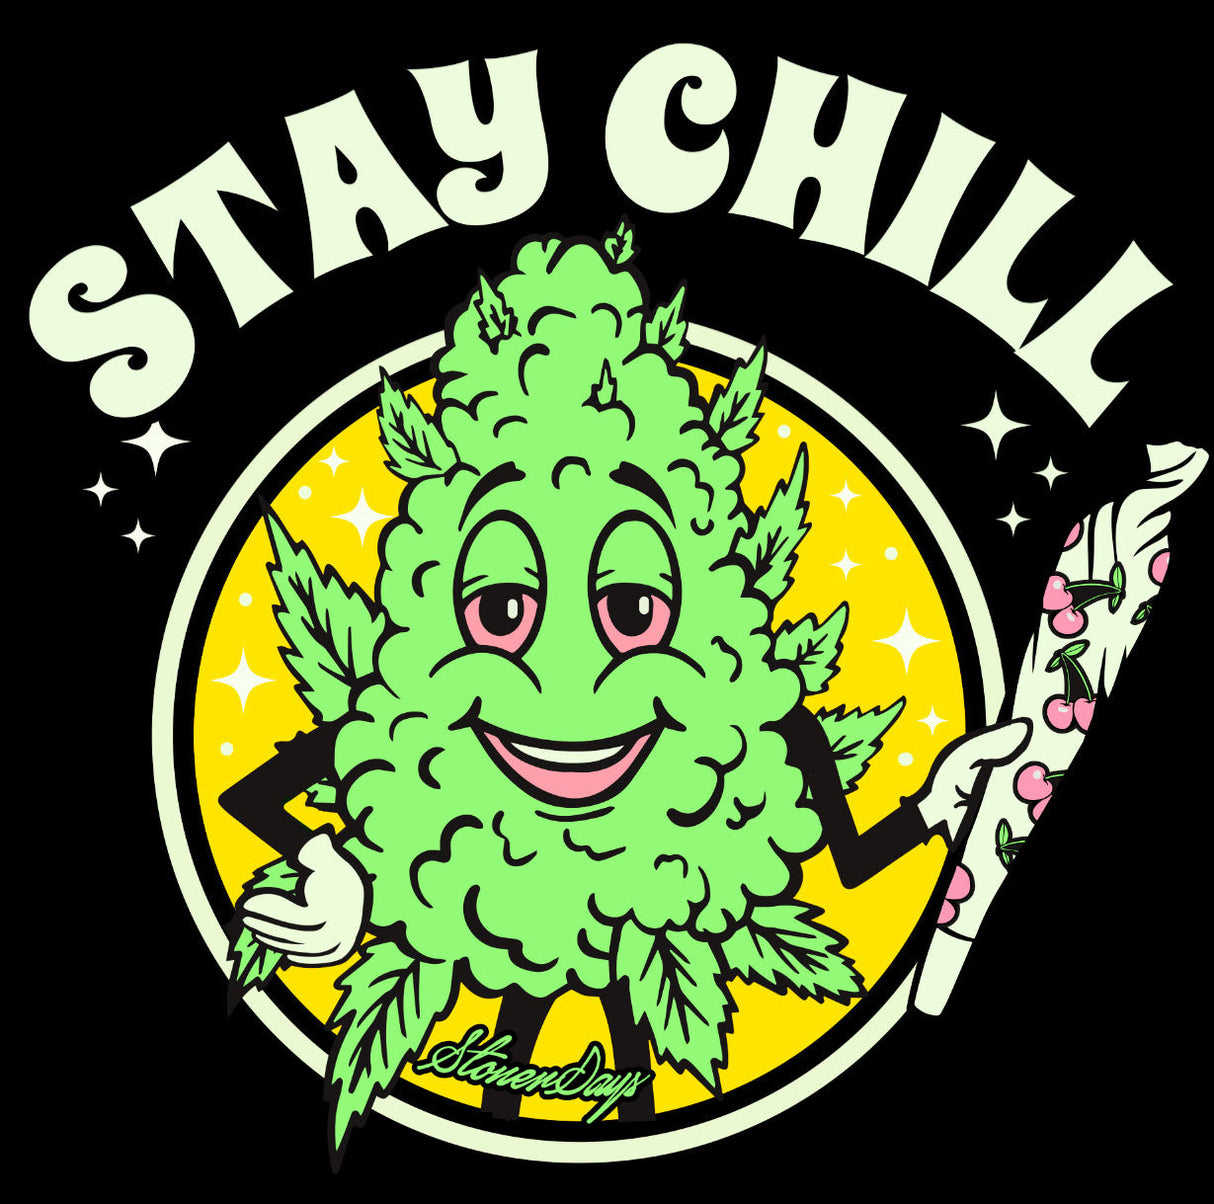 StonerDays Stay Chill Tee design close-up featuring a smiling cannabis leaf character